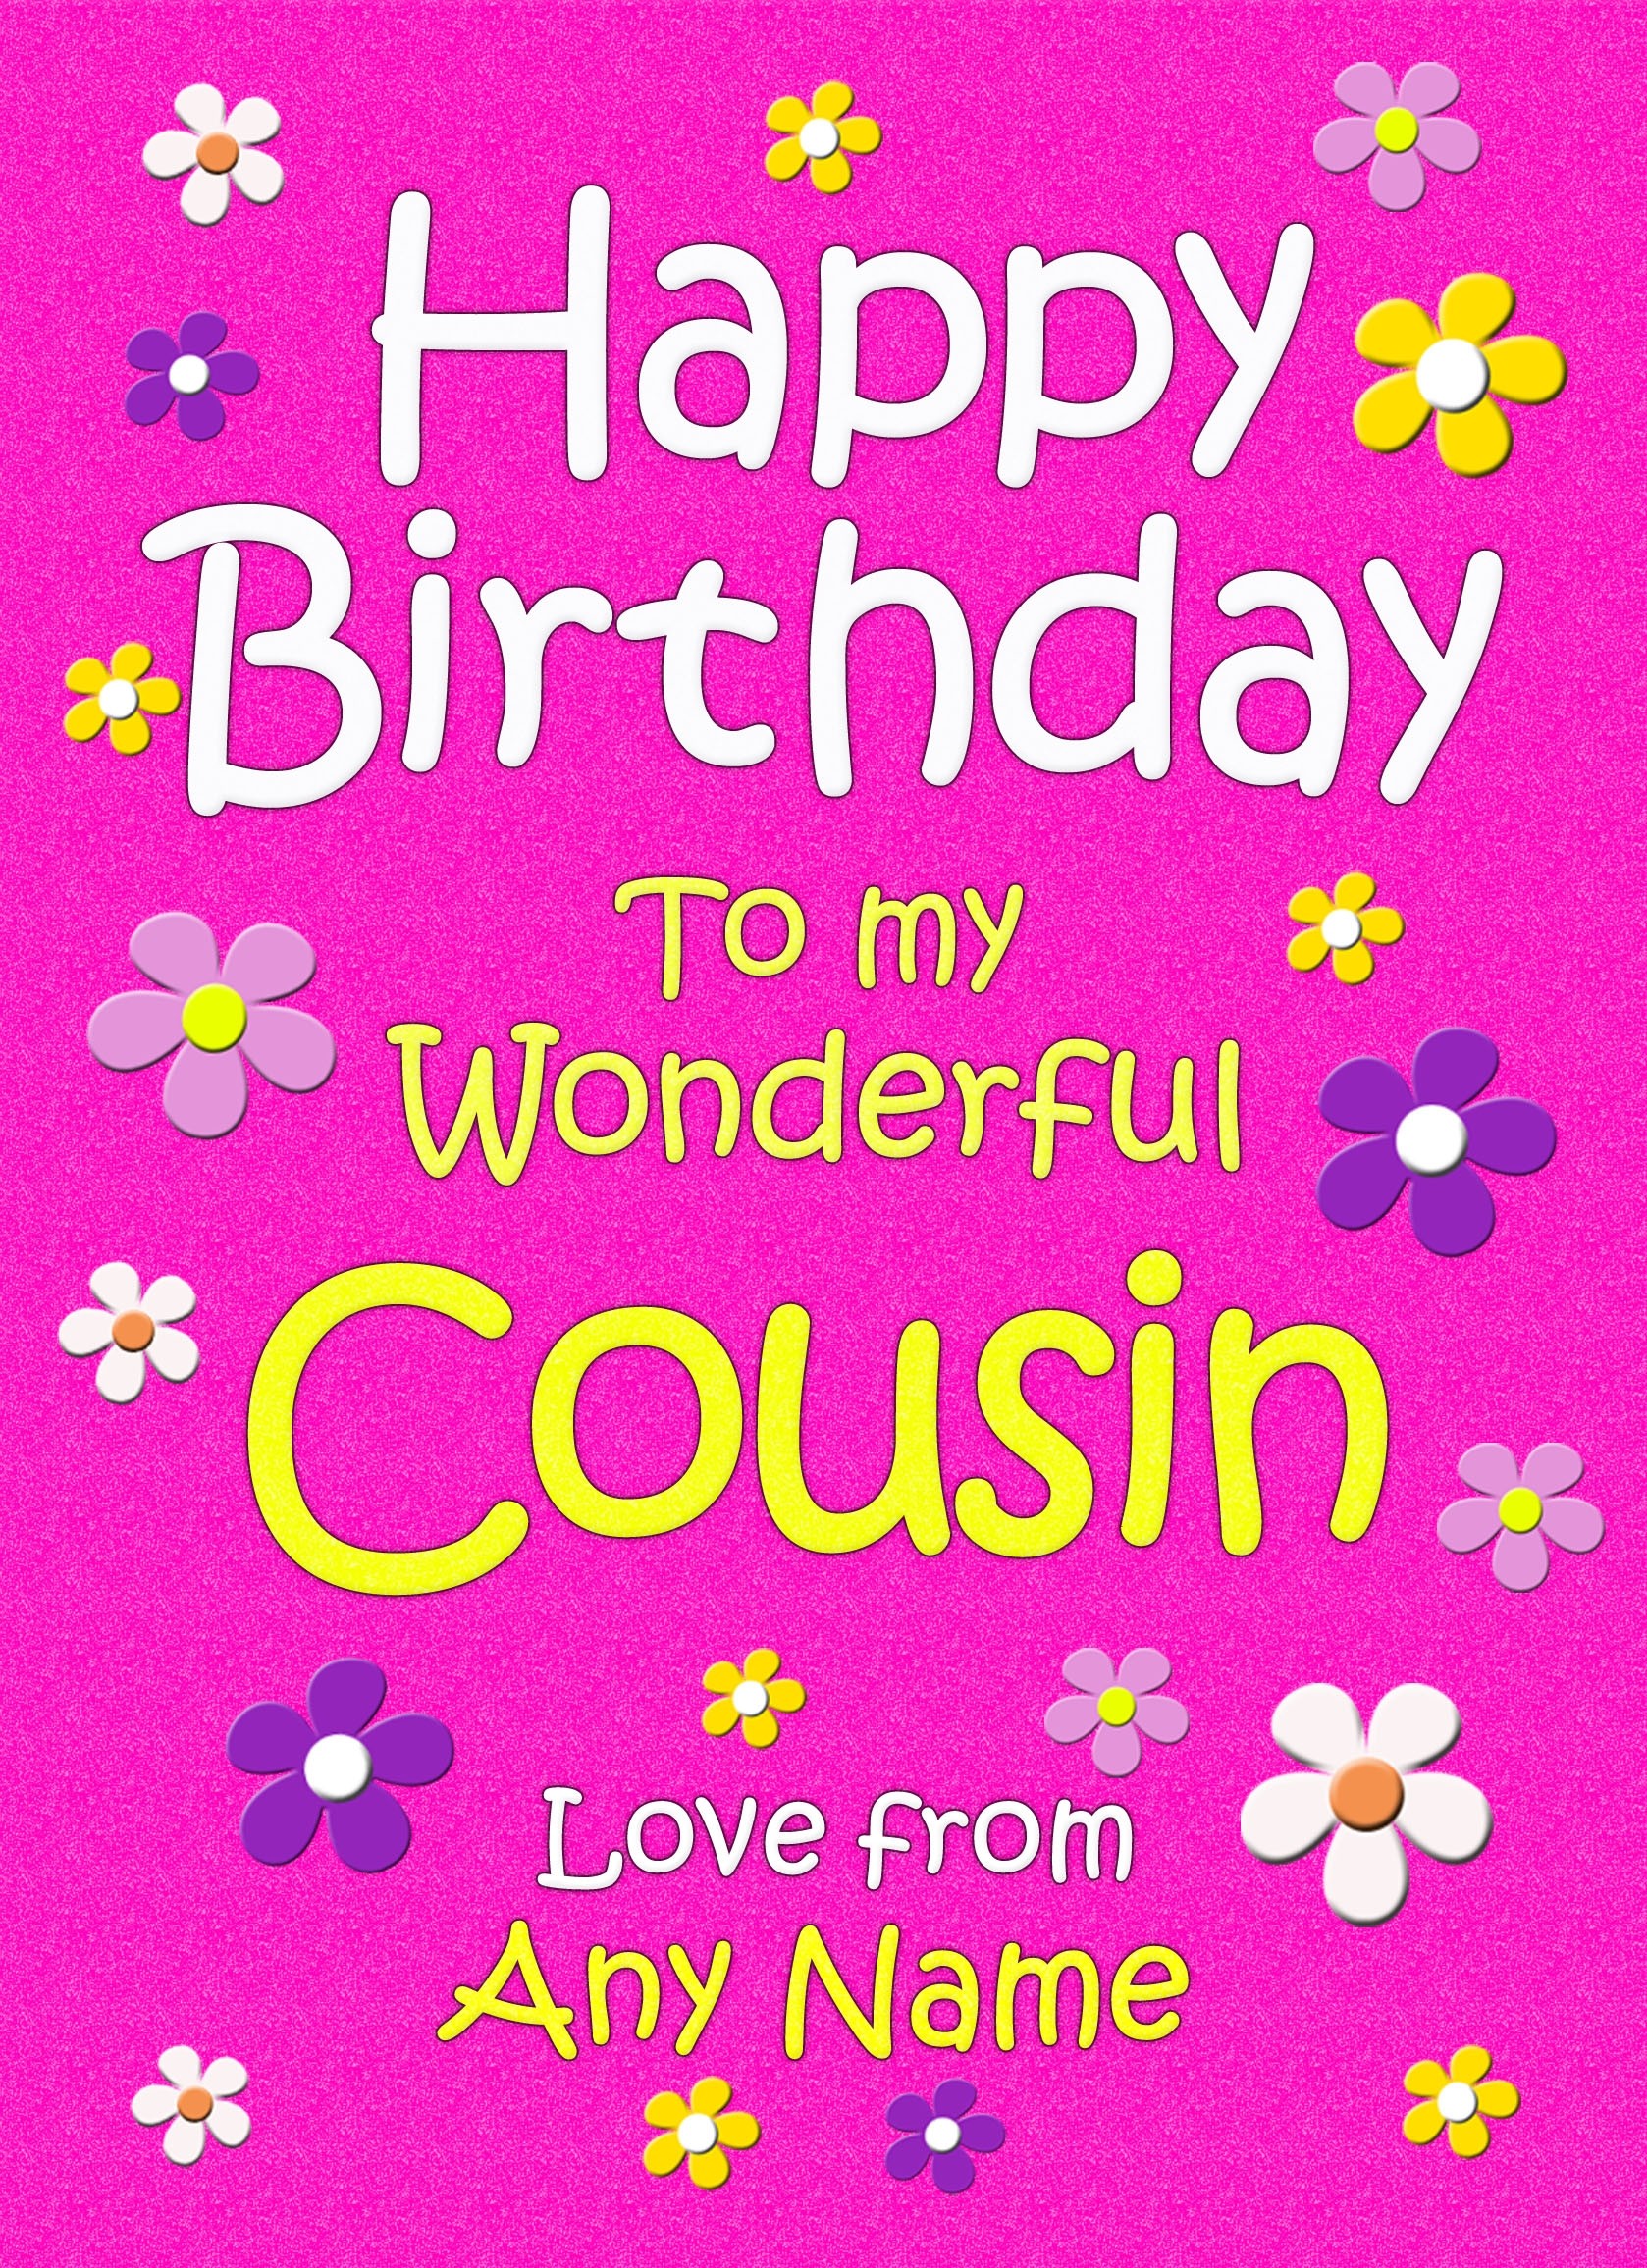 Personalised Cousin Birthday Card (Cerise)